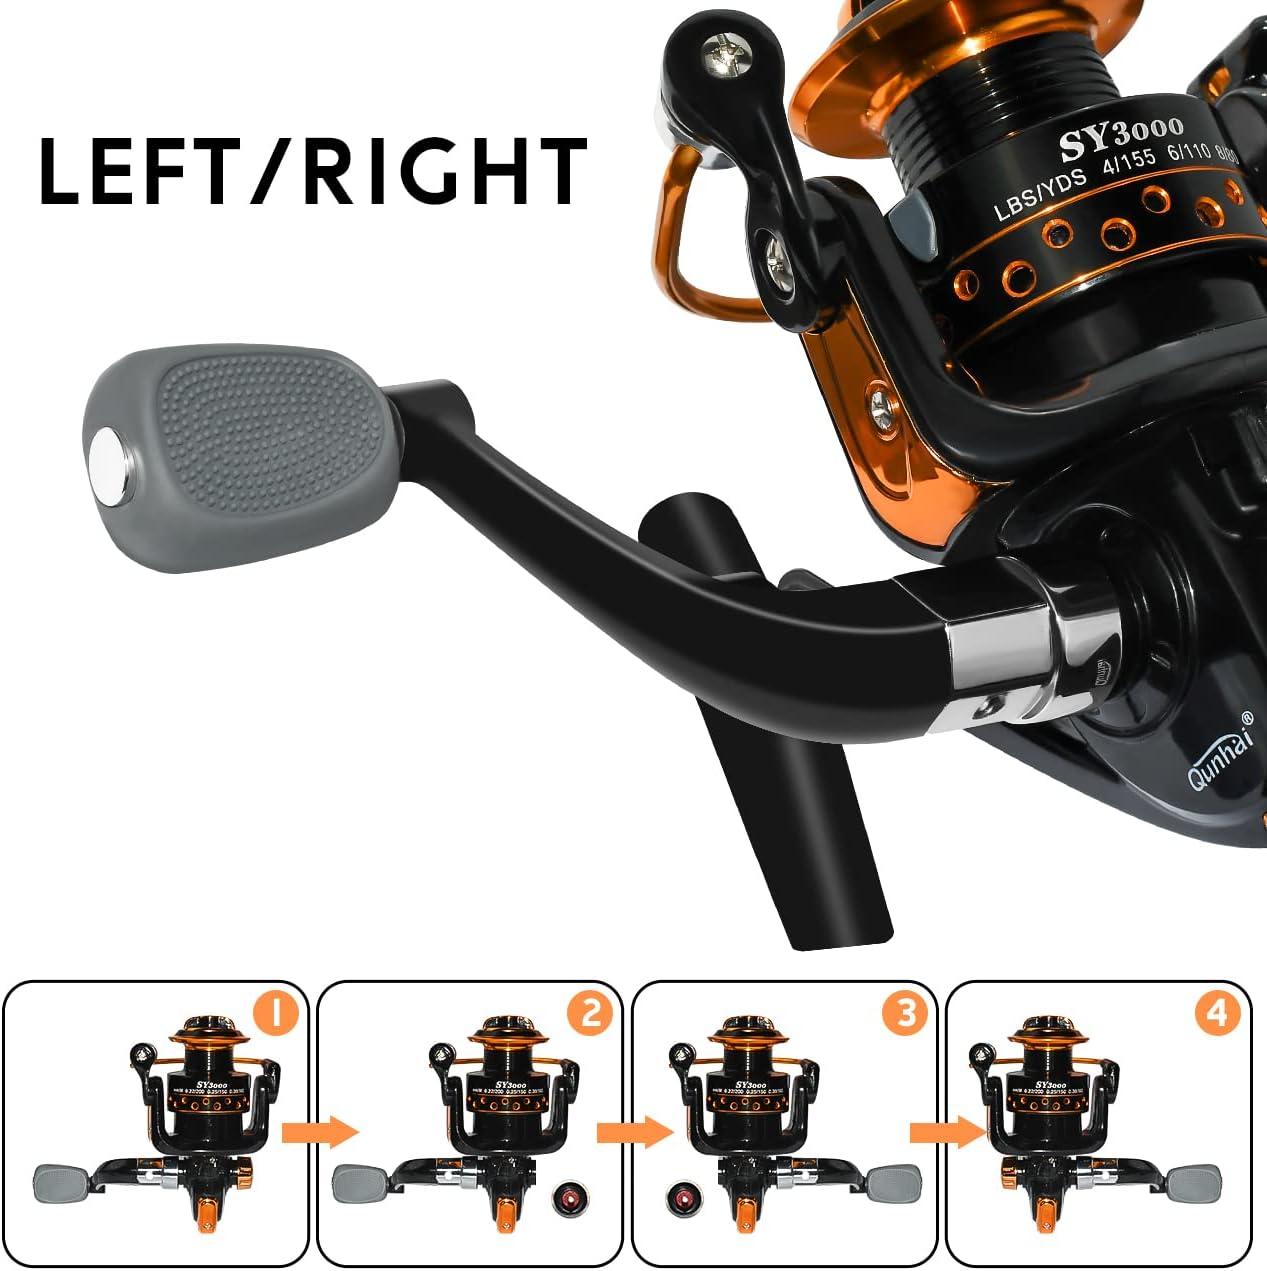 Summer and Centron Spinning Reels, 12 +1 BB Light Weight & Ultra Smooth  Reel for Ice/Summer 3000/1000 Fishing Reel by QINGLER